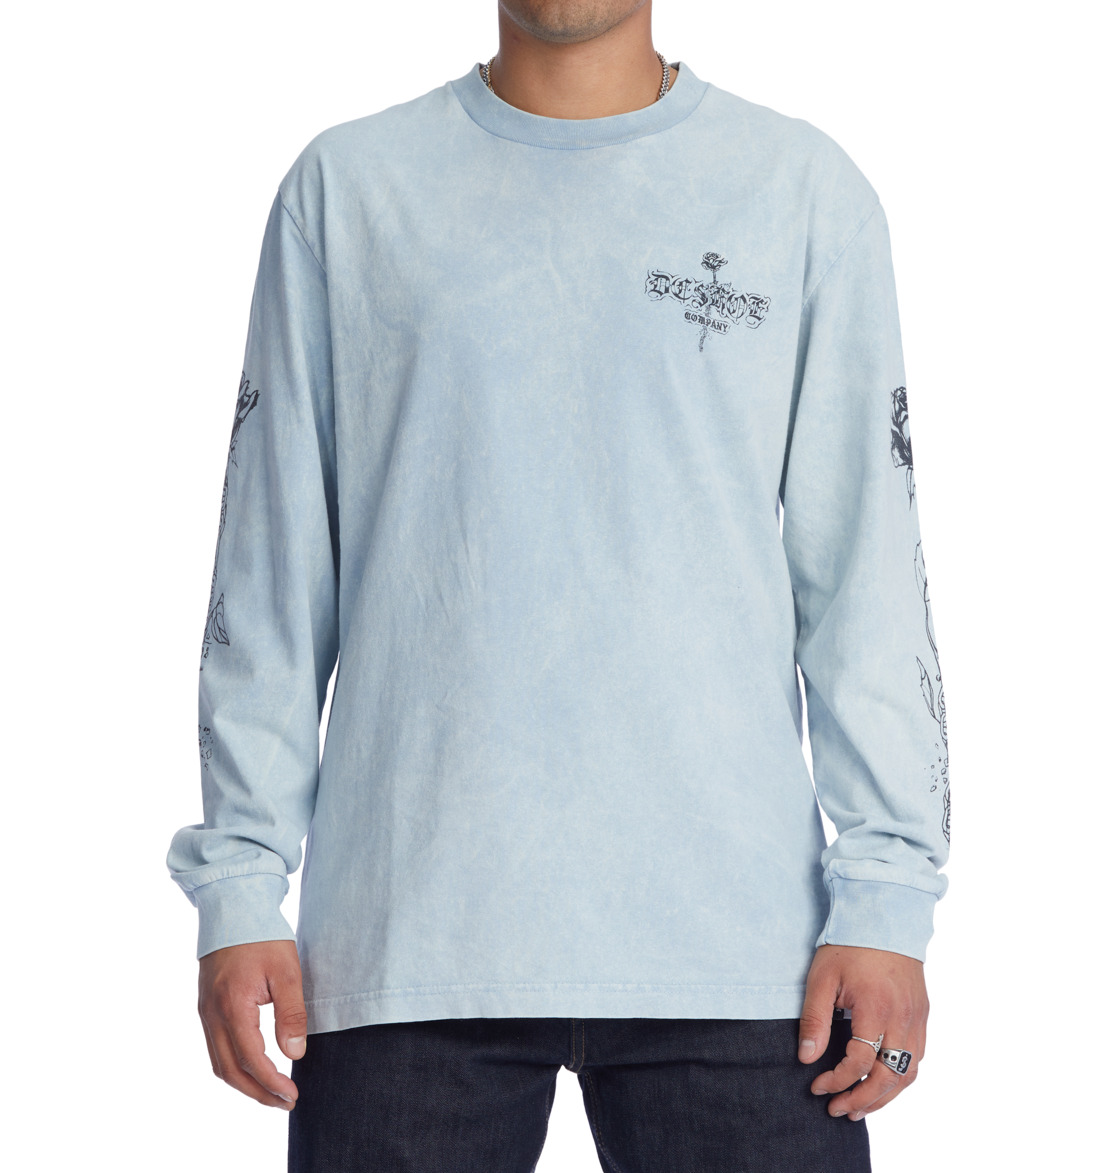 DC Shoes Langarmshirt »Double Or Nothing« von DC Shoes